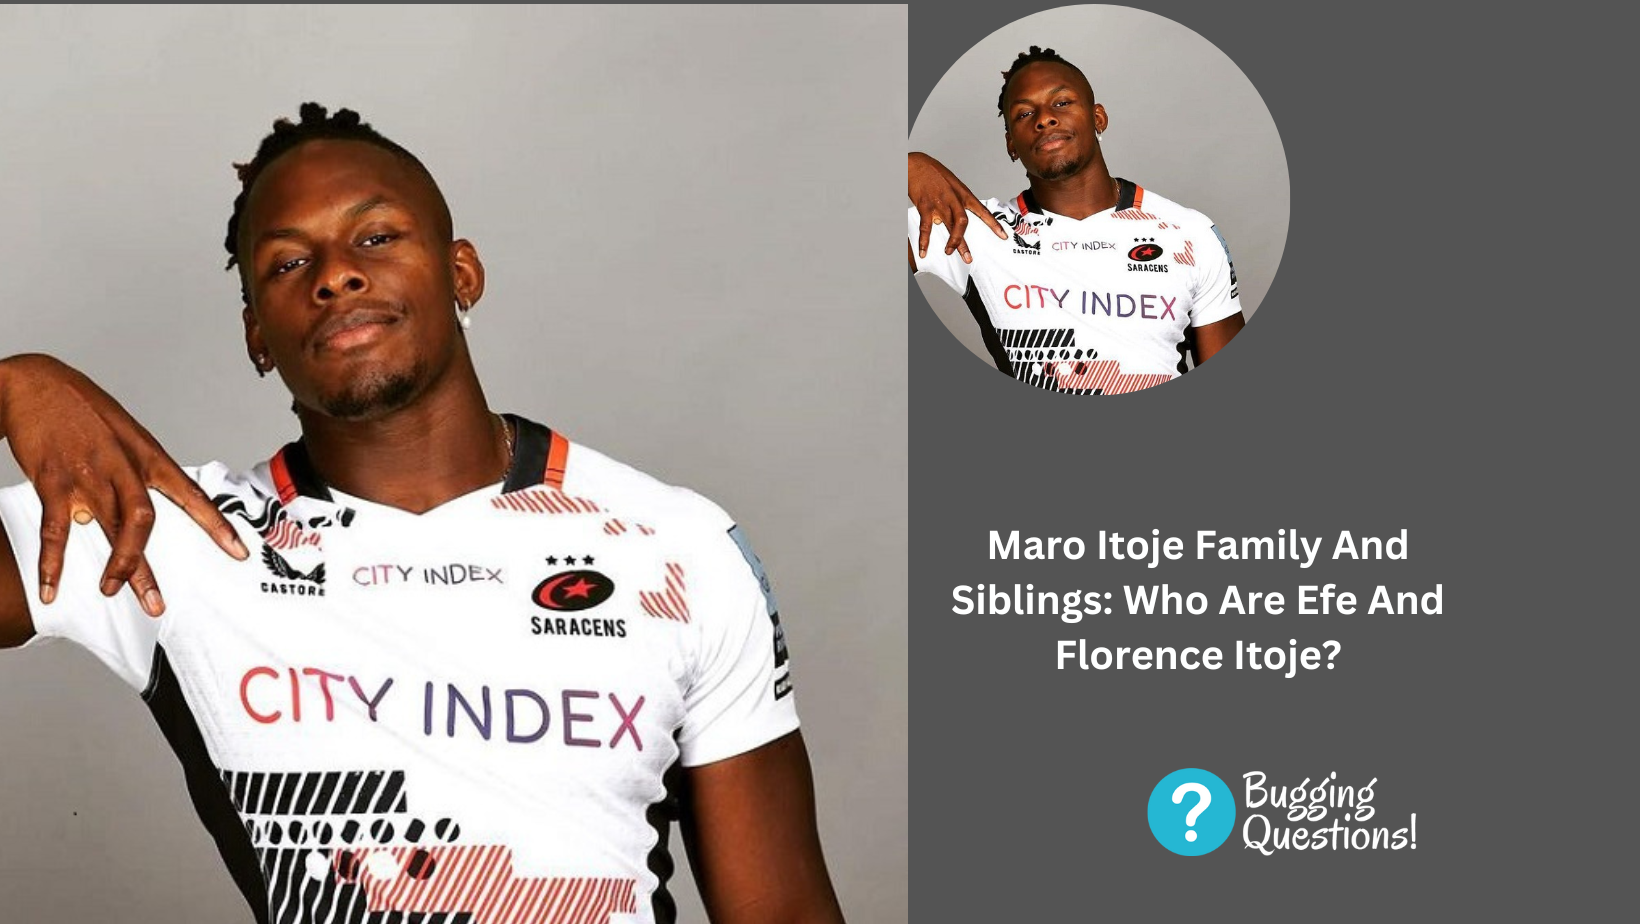 Maro Itoje Family And Siblings: Who Are Efe And Florence Itoje?